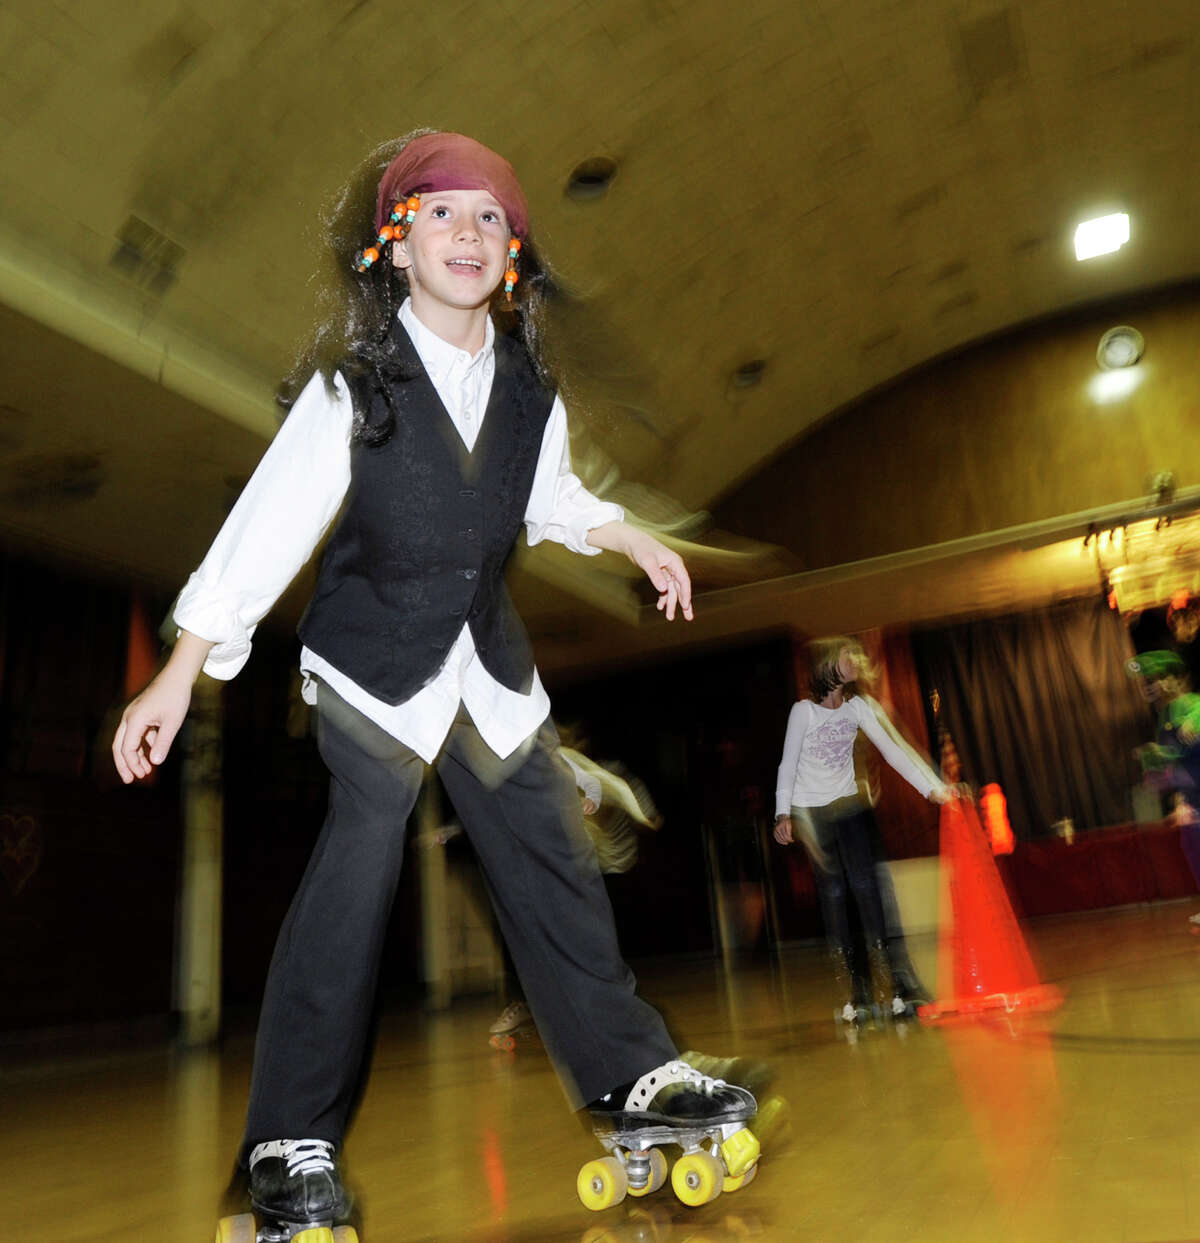 Caleb Fockens, 8, of Old Greenwich, wears a pirate custome during the Friday Night Halloween Skate at the Old Greenwich Civic Center, Oct. 28, 2011.